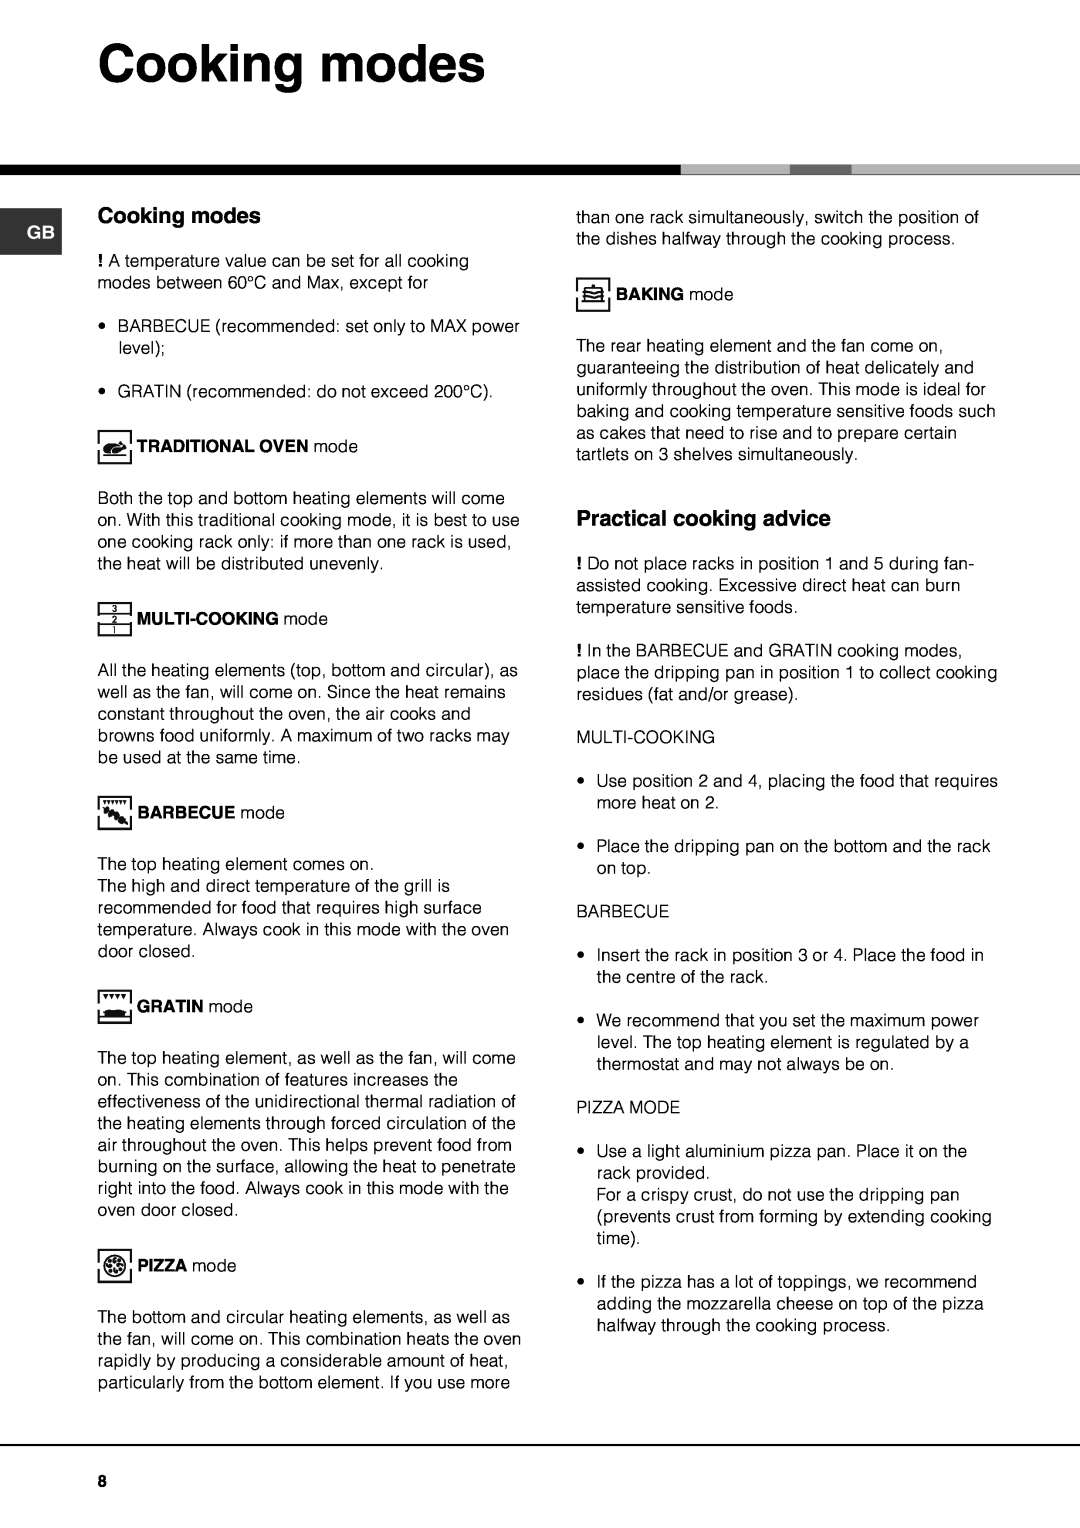 Hotpoint SE61X operating instructions Cooking modes, Practical cooking advice 